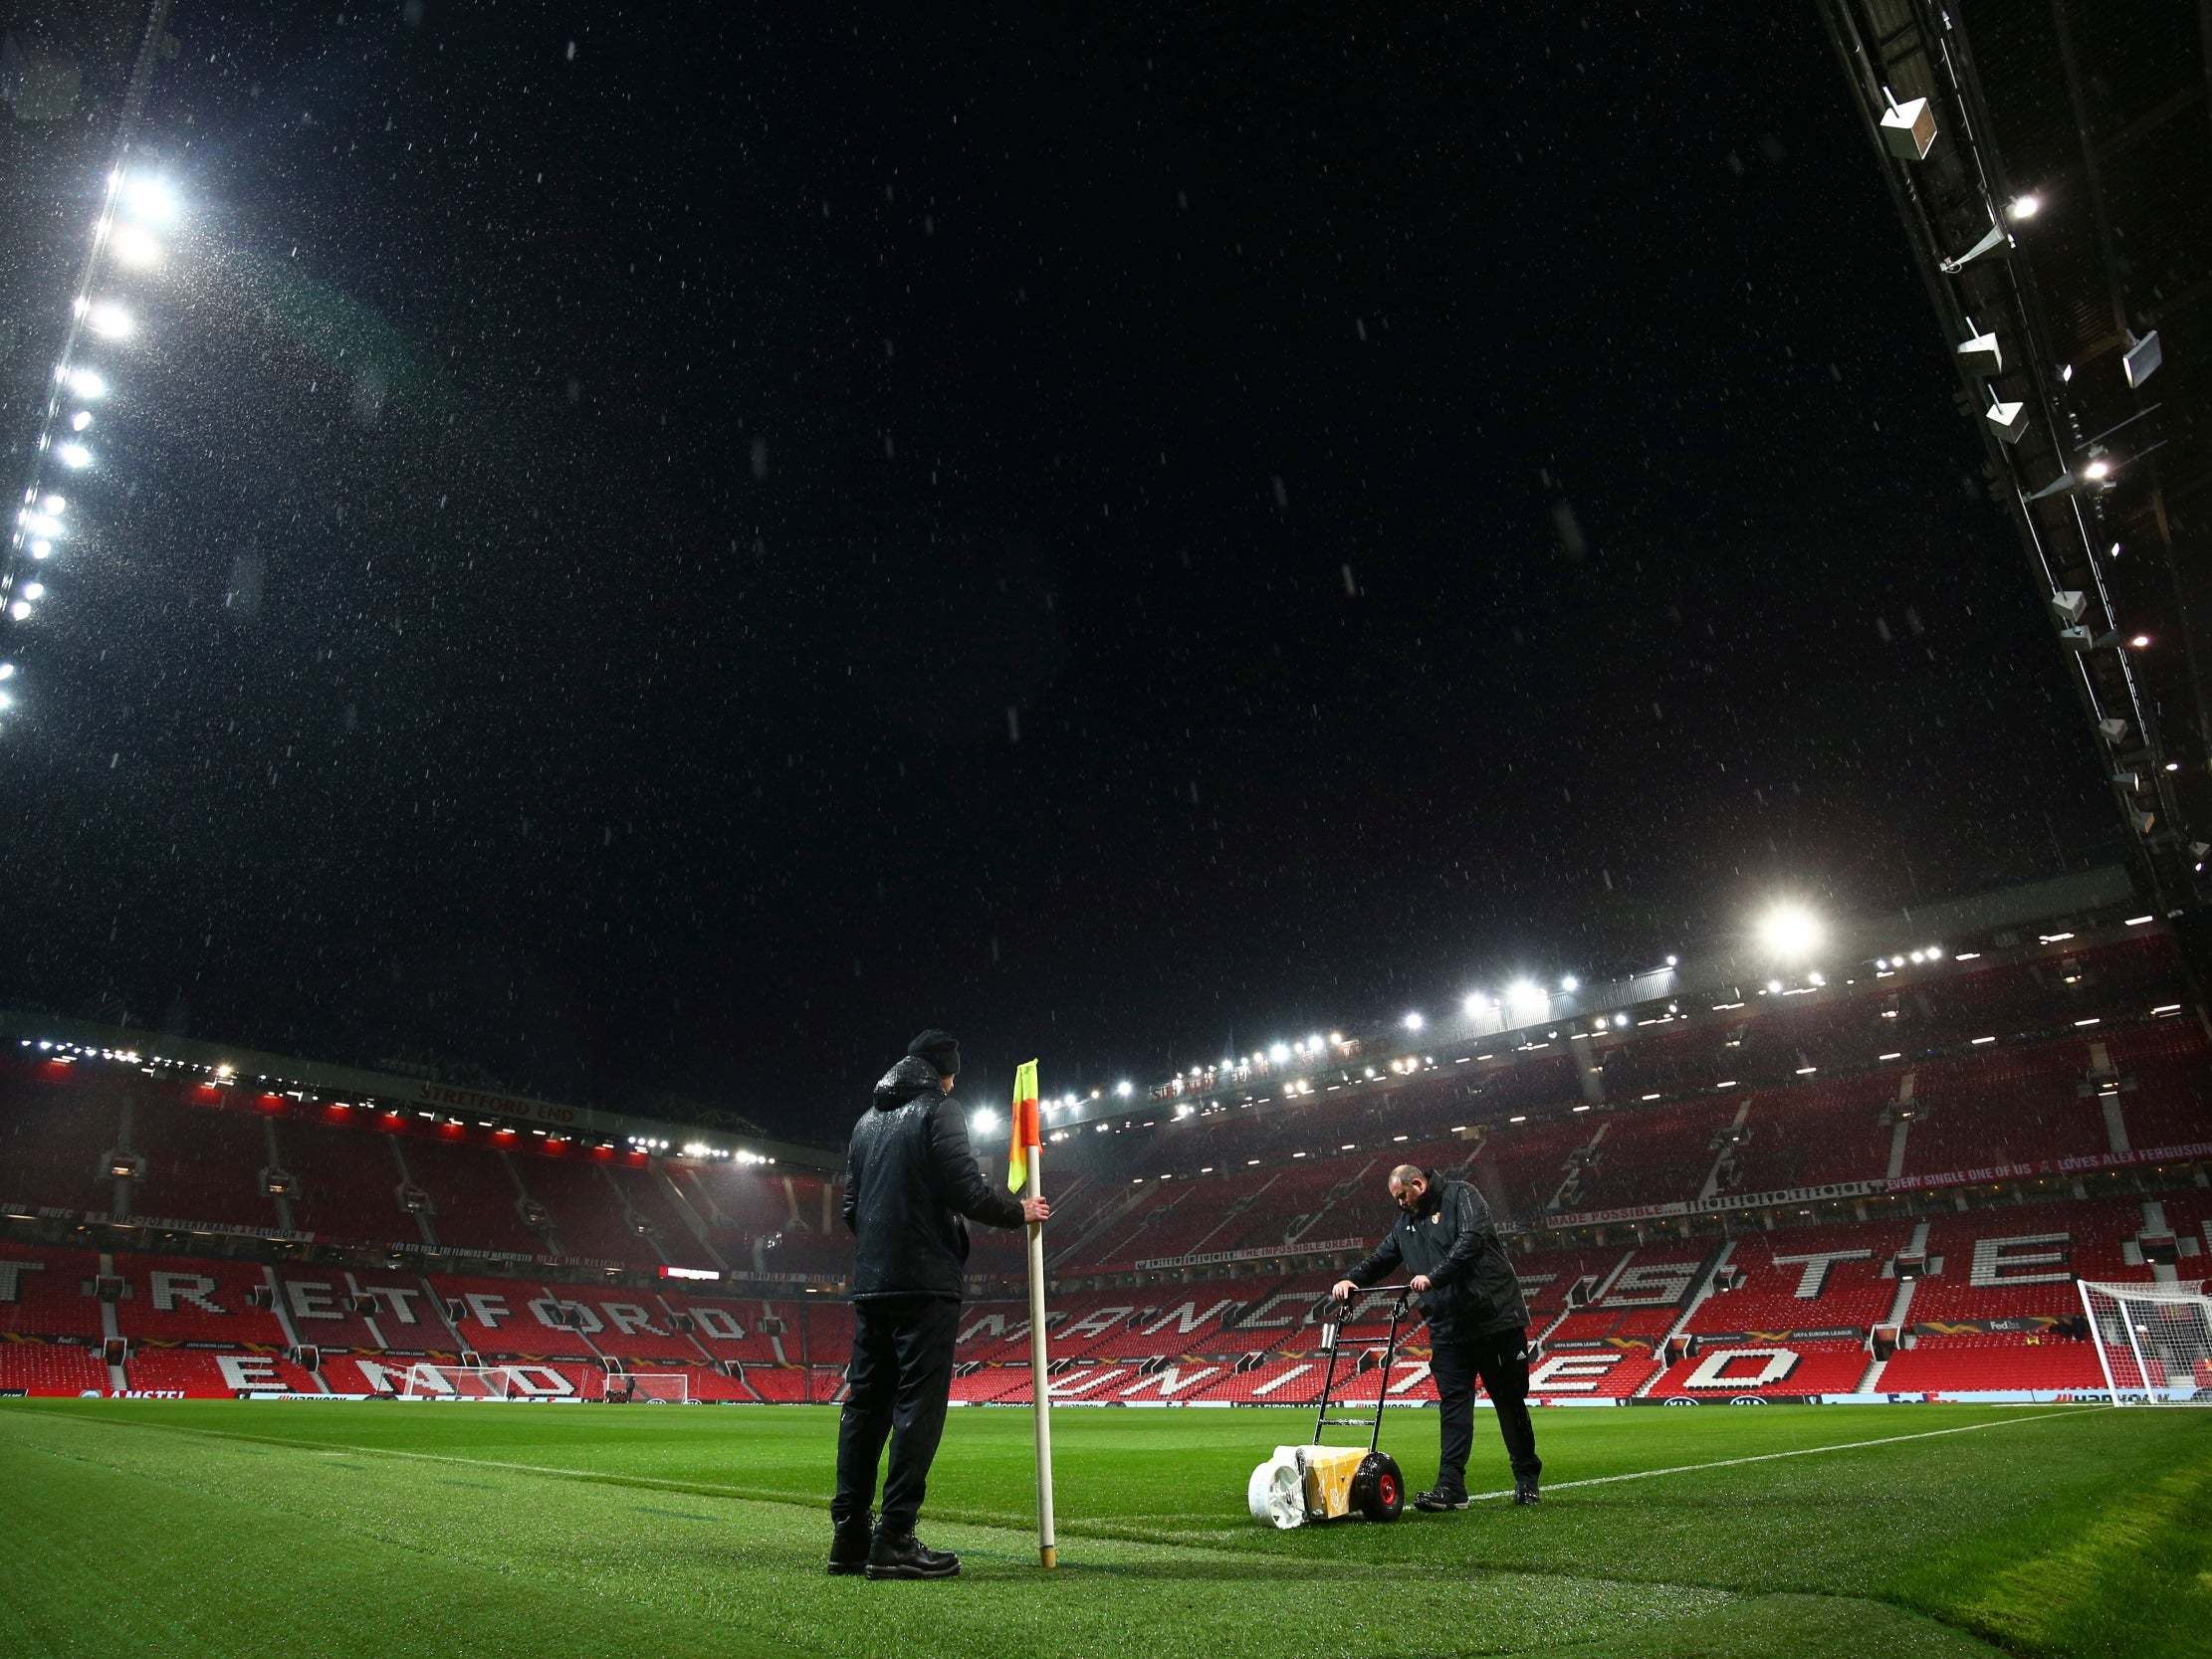 Manchester United vs Partizan LIVE: Stream, score, teams and latest updates from the Europa League